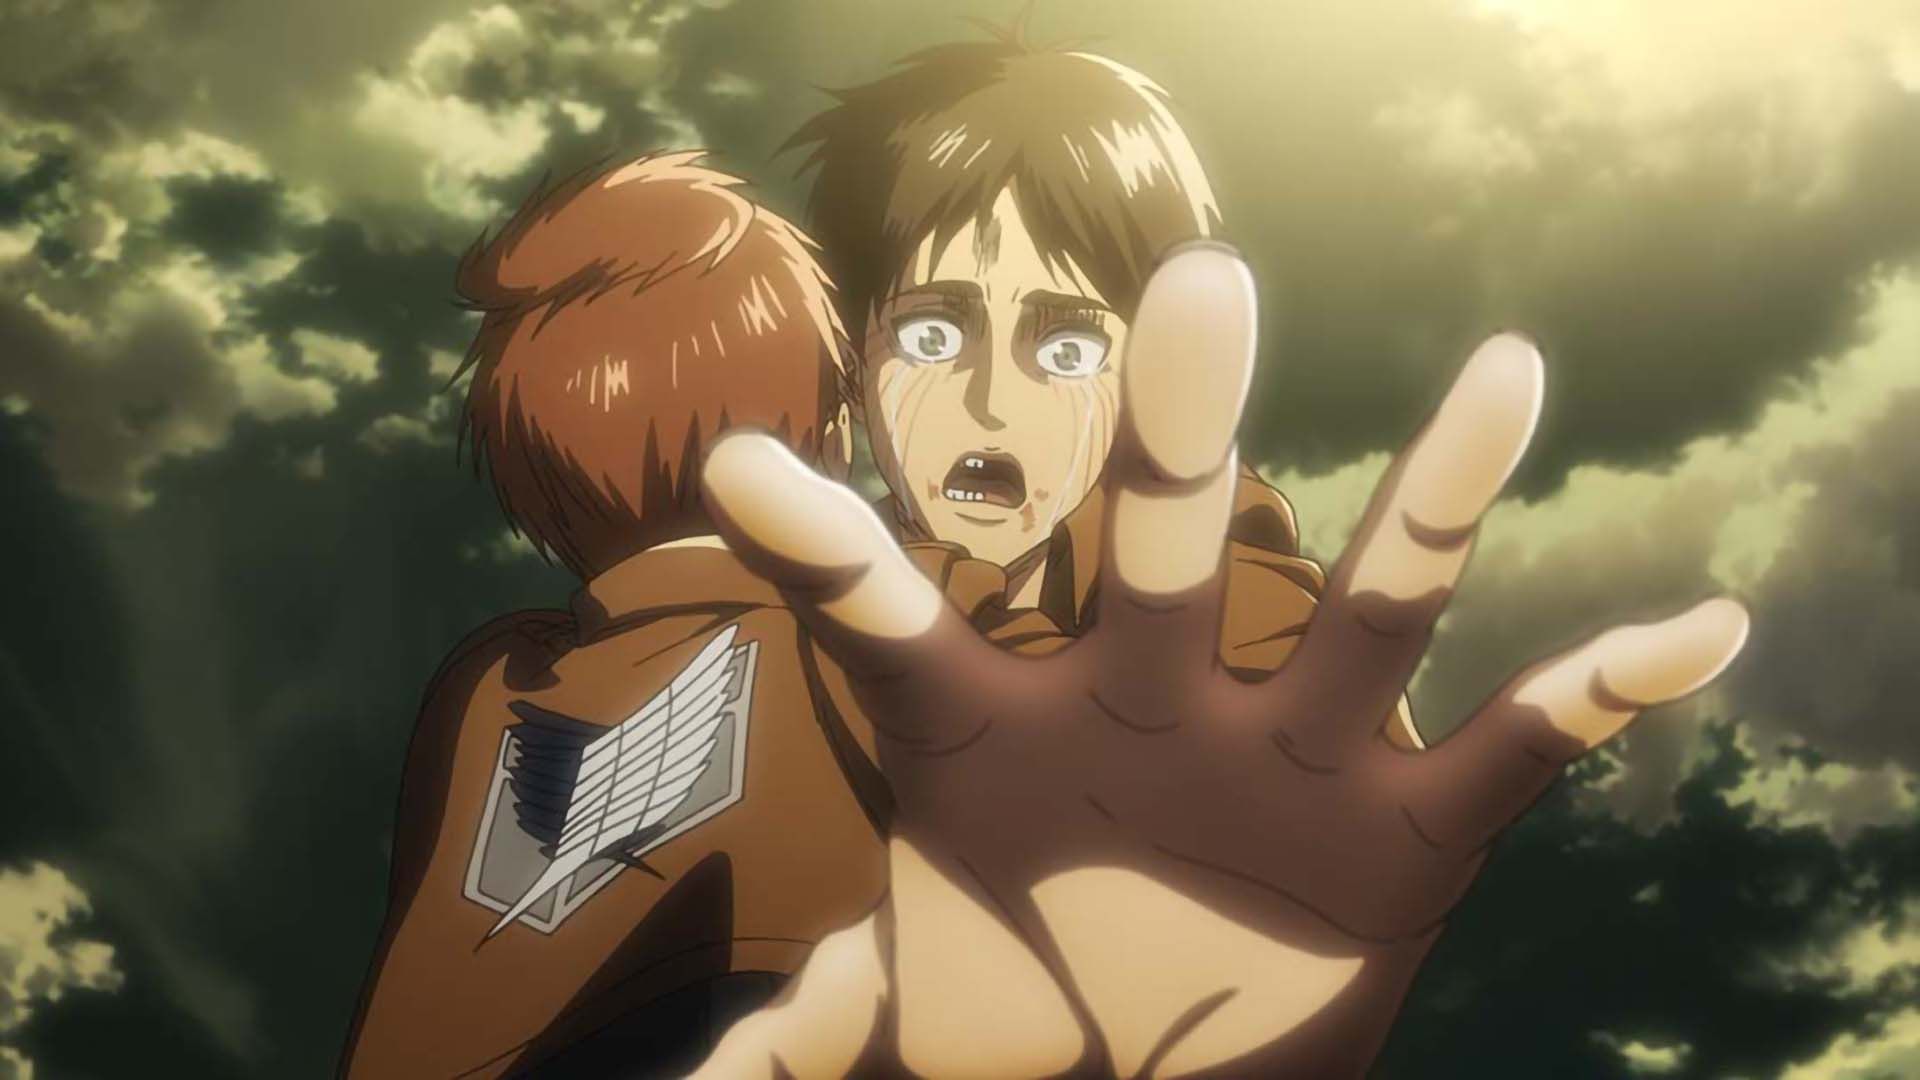 Watch Full Episodes of Attack on Titan, a Part of Toonami on Adult Swim. 